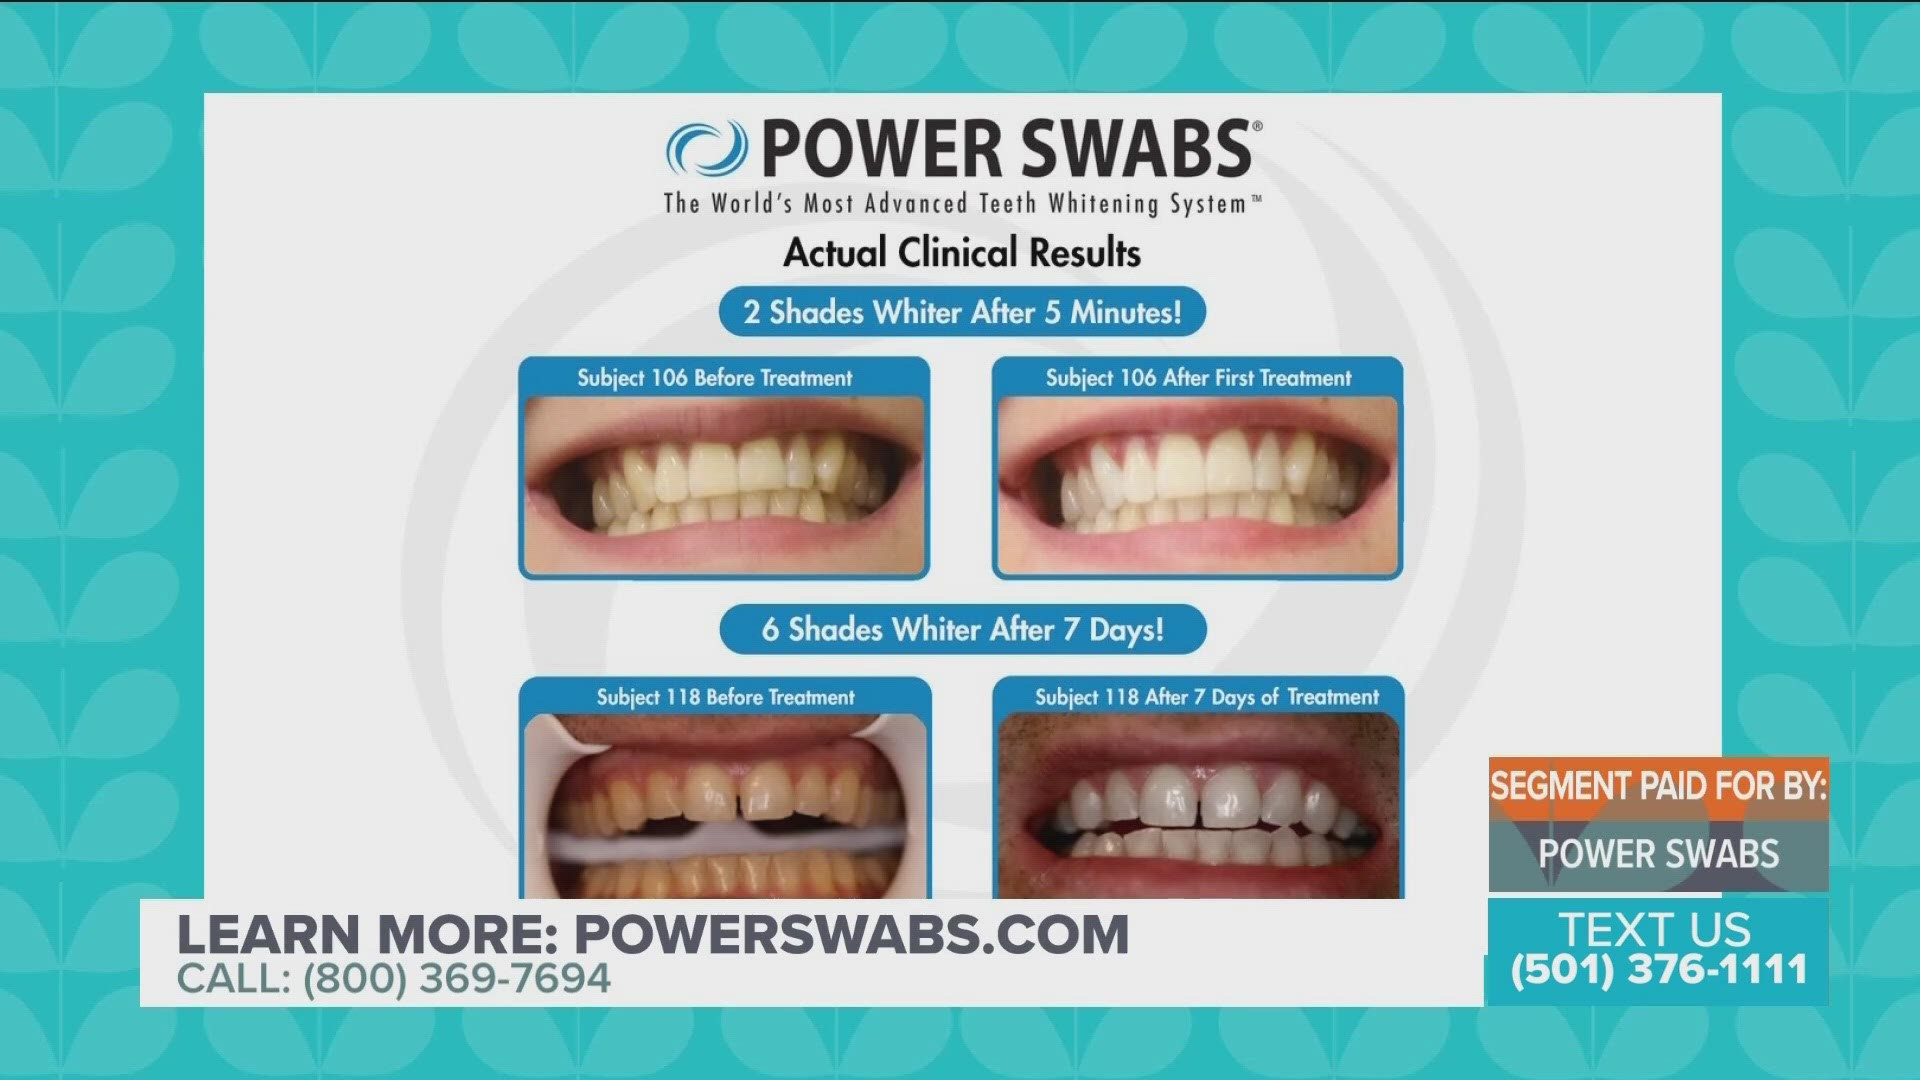 Power Swabs Teeth Whitening System offers a 50% off with free shipping and a quick stick.